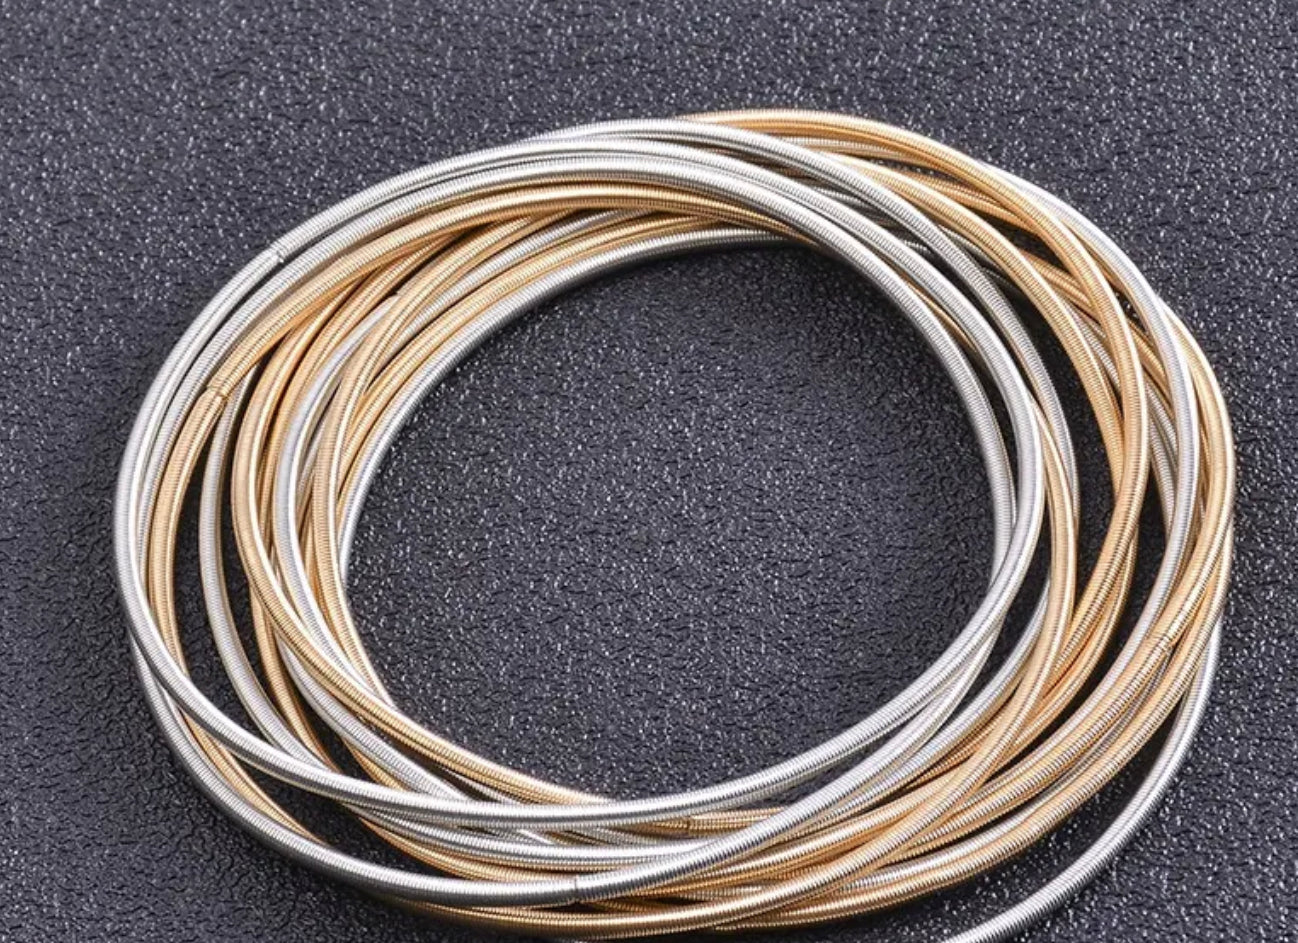 Gold and Silver Memory Spring Wire Bracelets 19MM in Length Steel Wrap Bangle